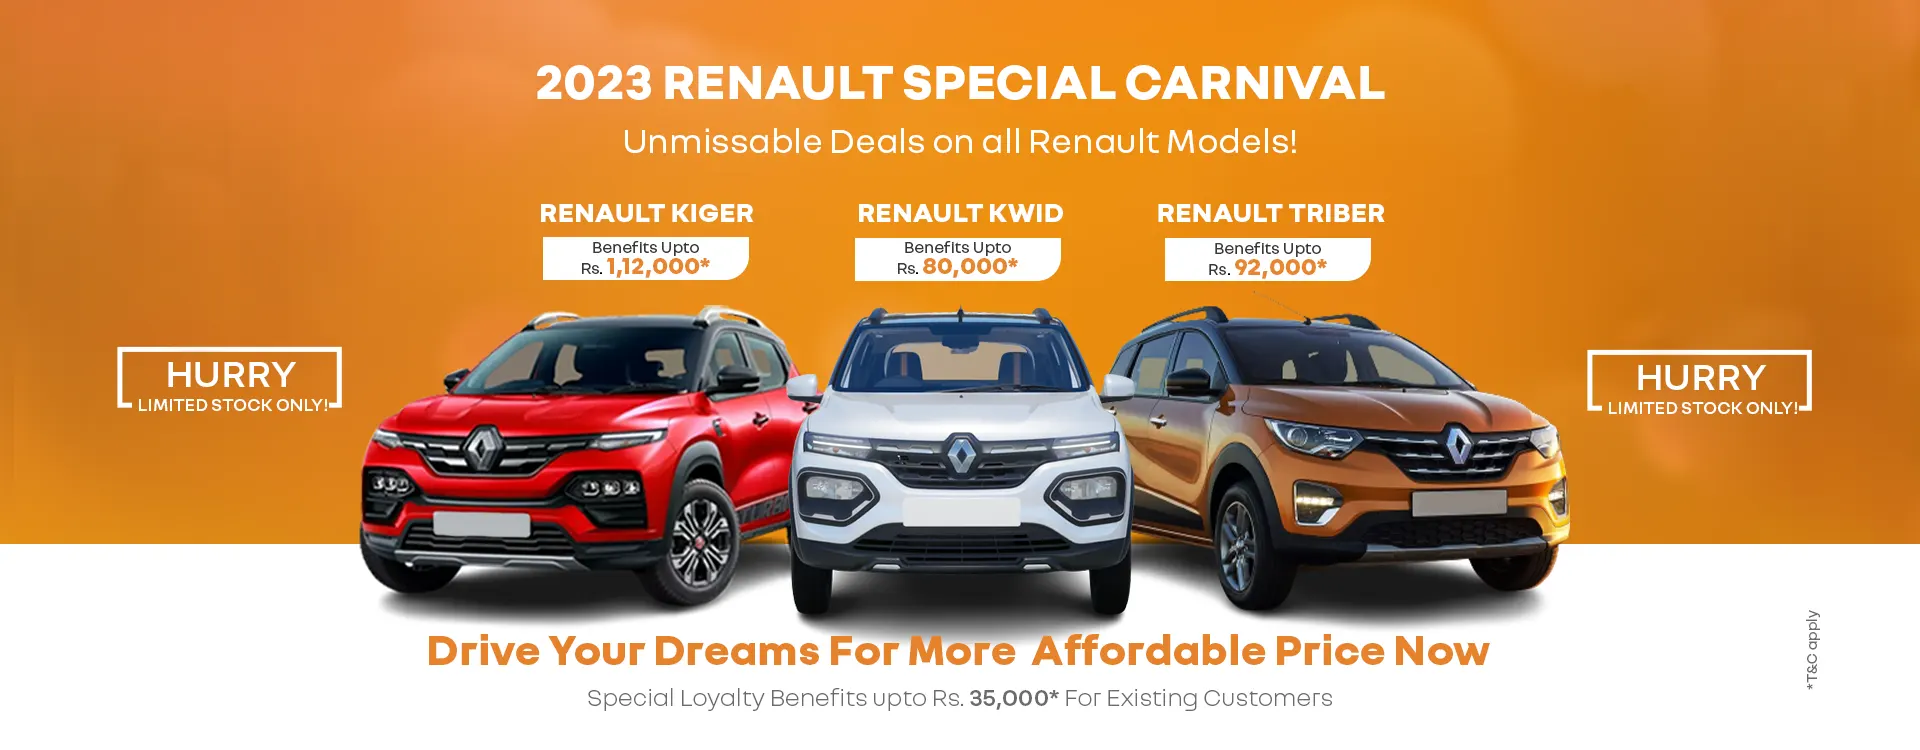 Renault offers